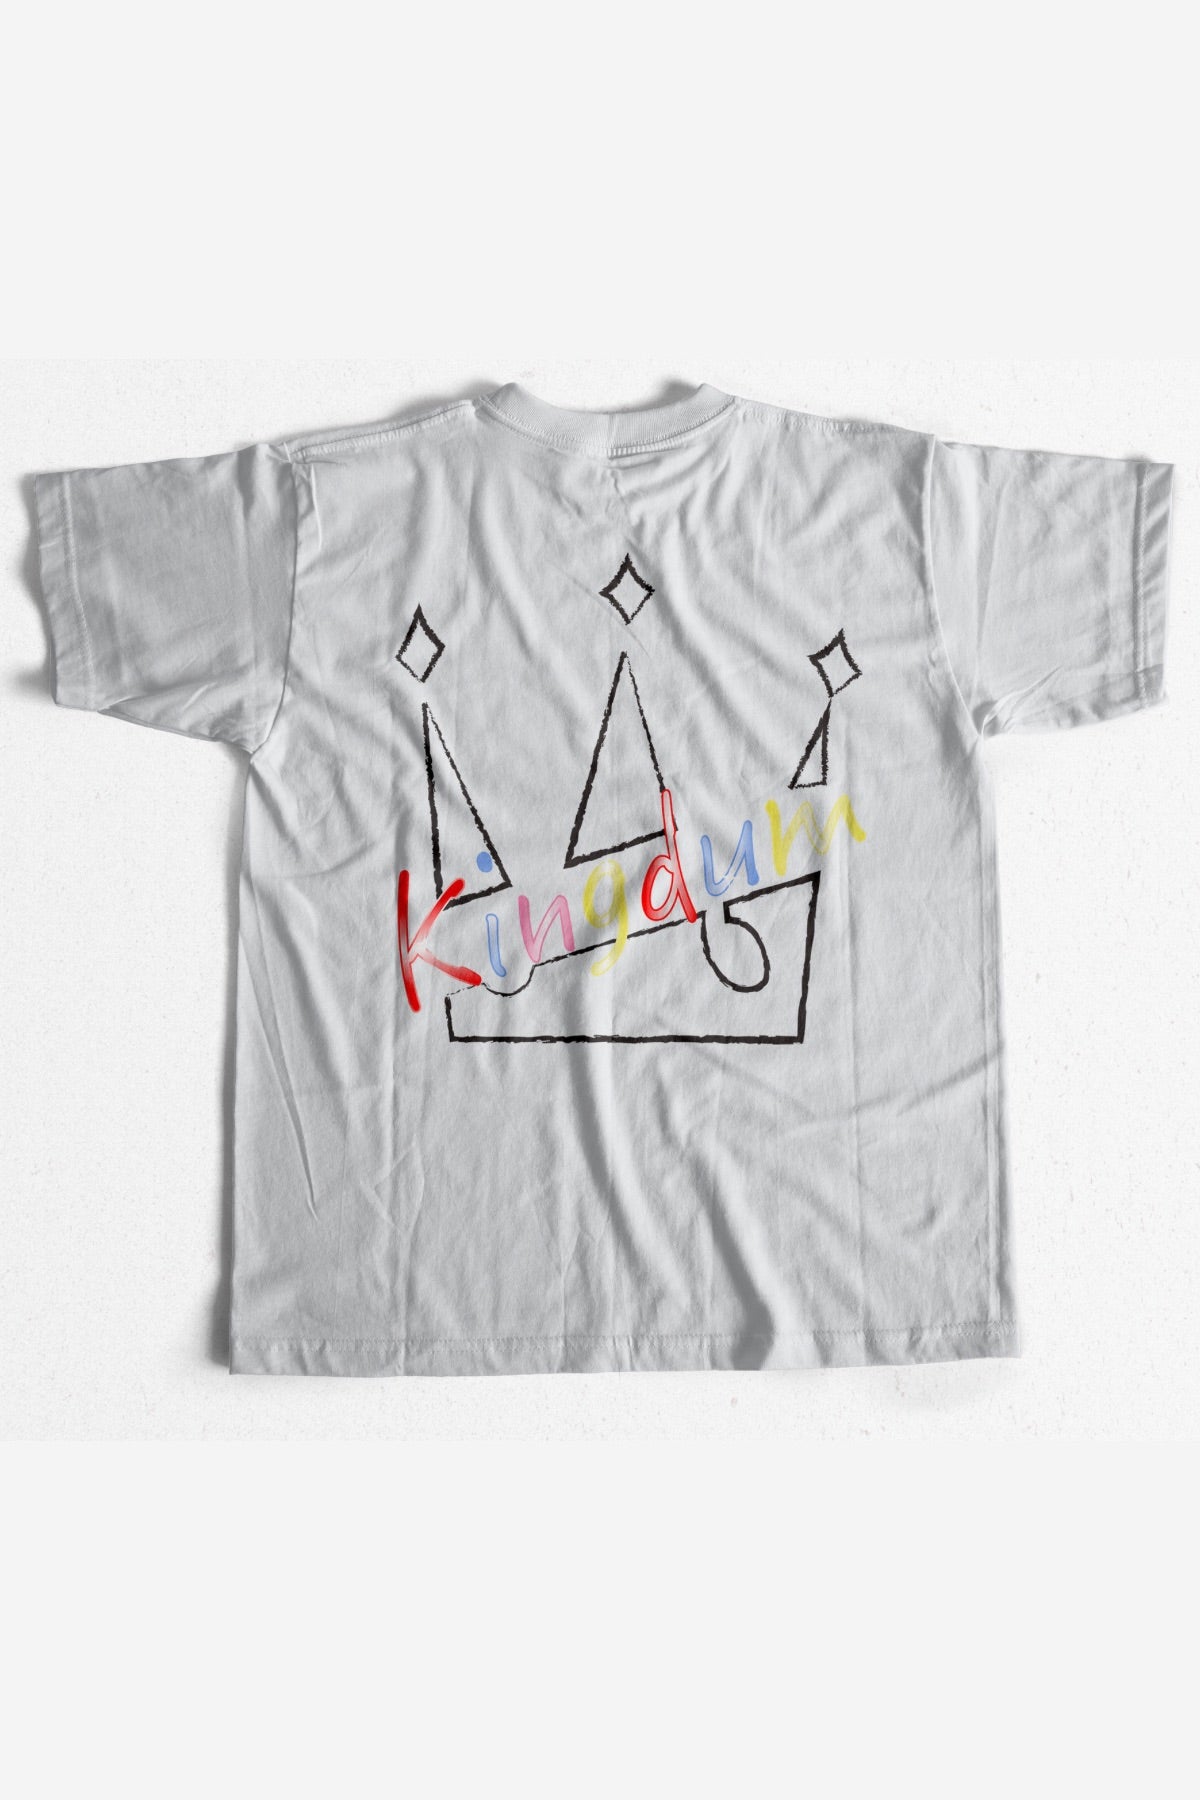 Sketched Out Crown T-shirt (White)